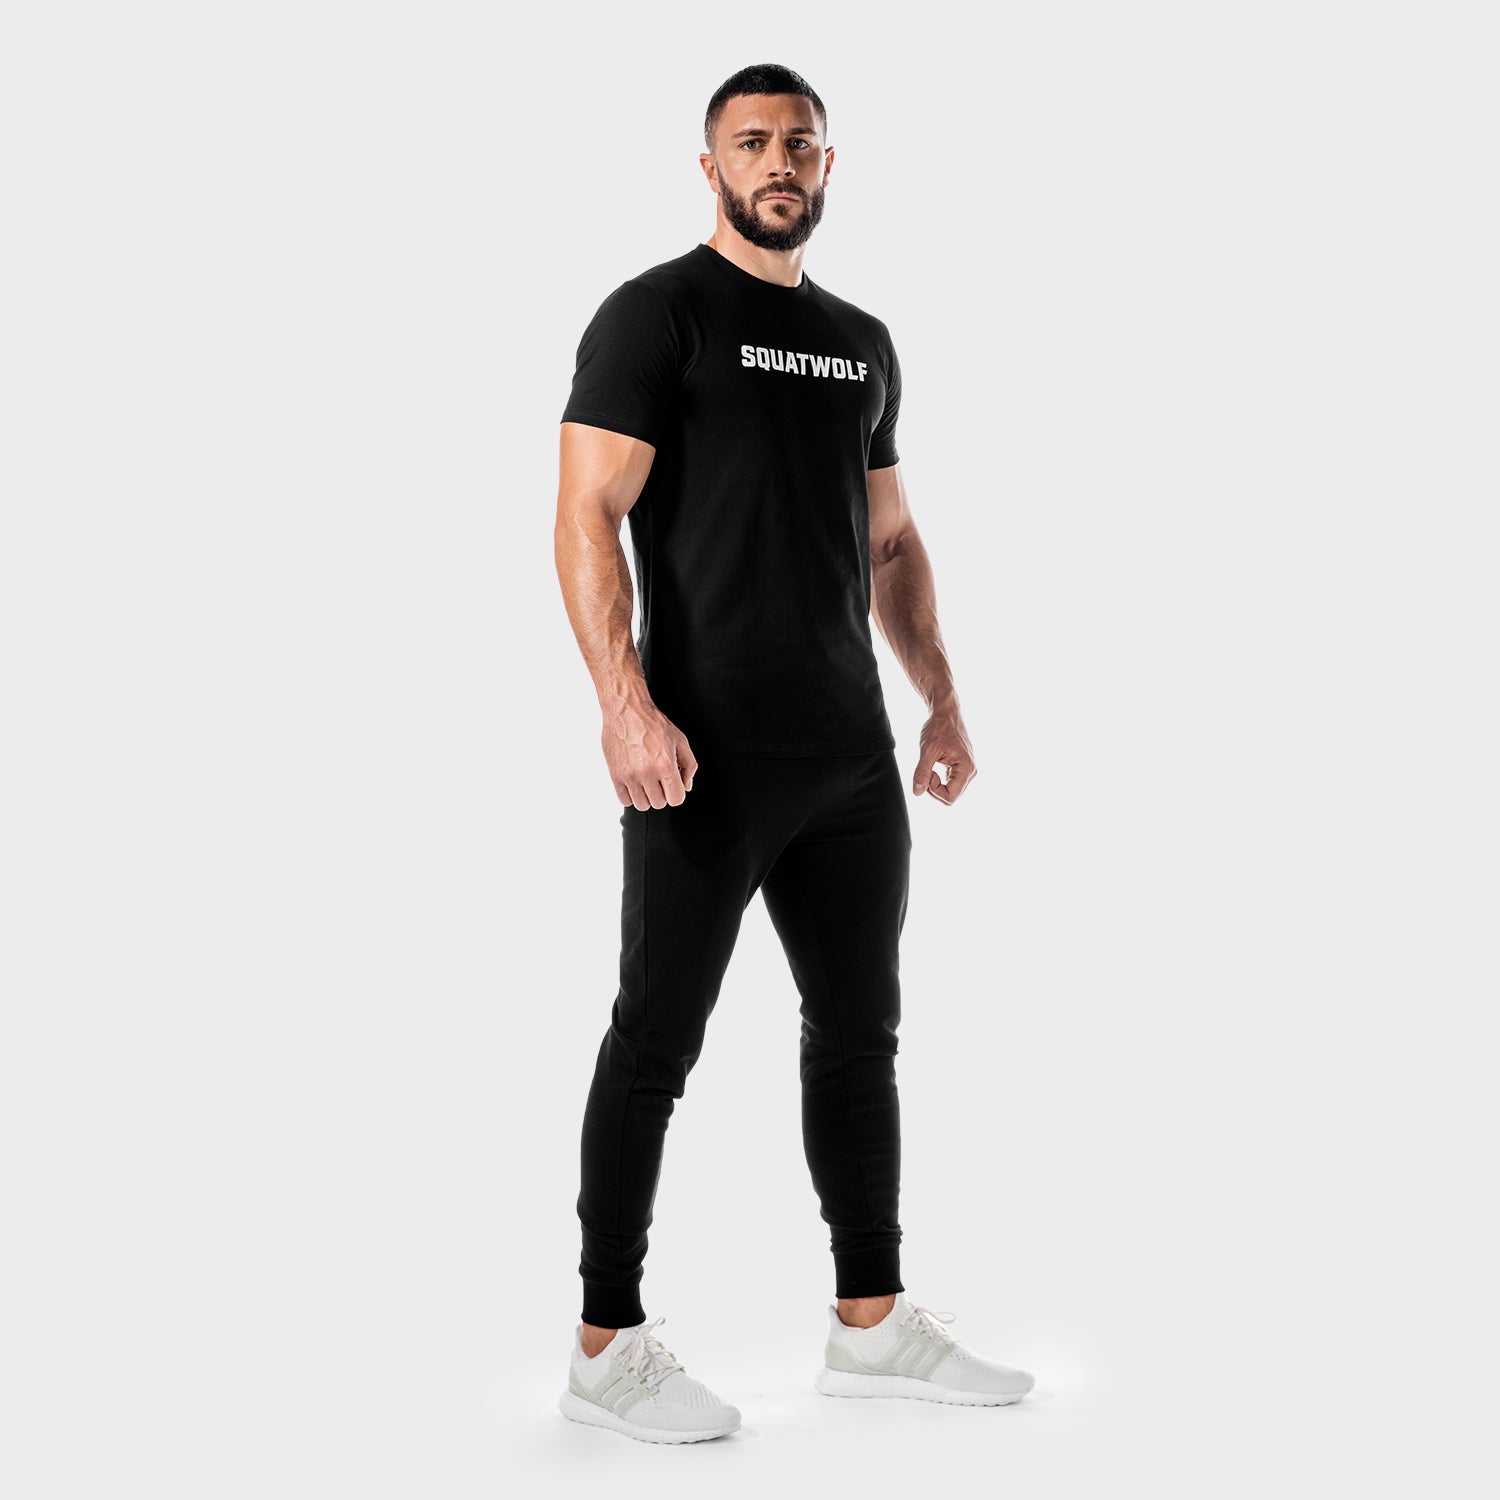 squatwolf-gym-wear-iconic-muscle-tee-black-workout-shirts-for-men